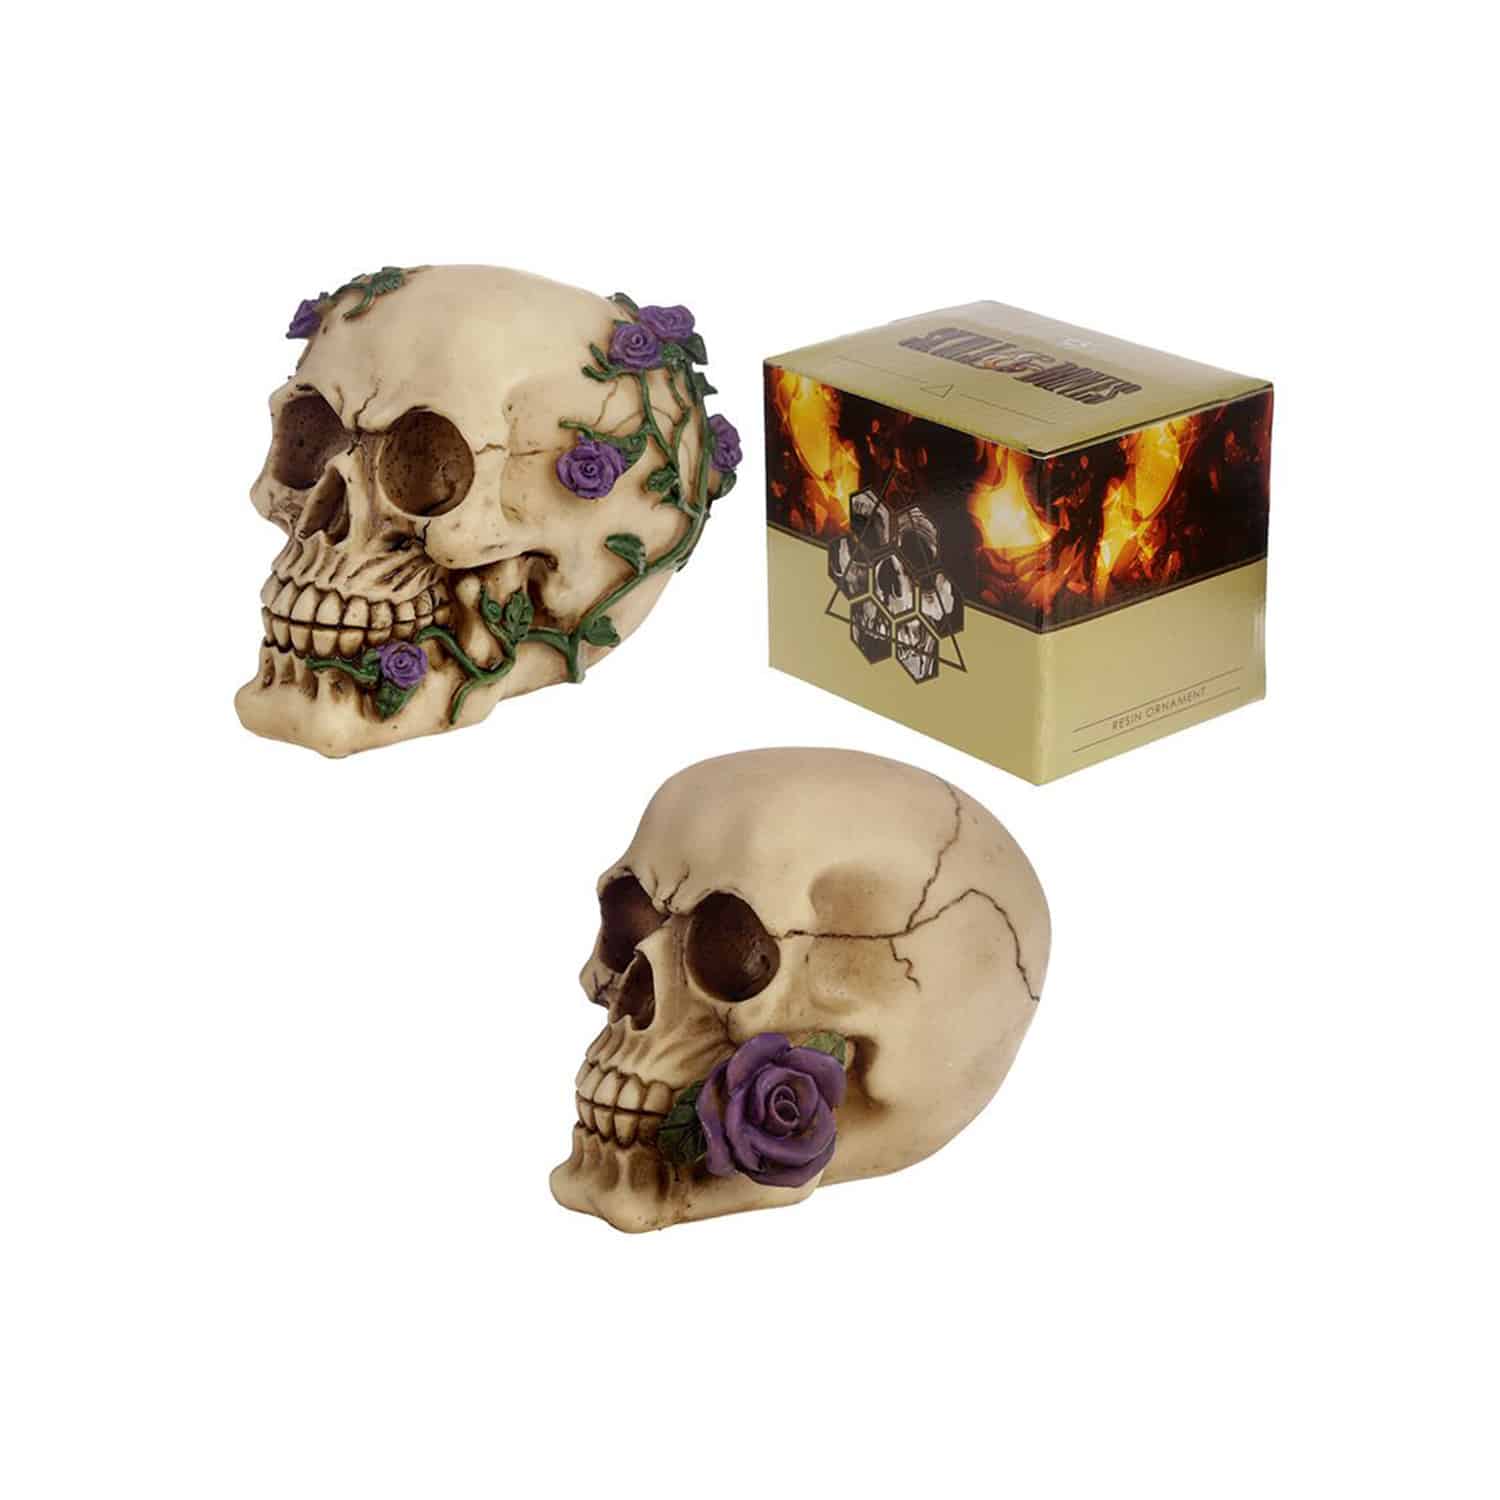 Skulls and Roses - Skull with Purple Roses Random Selection